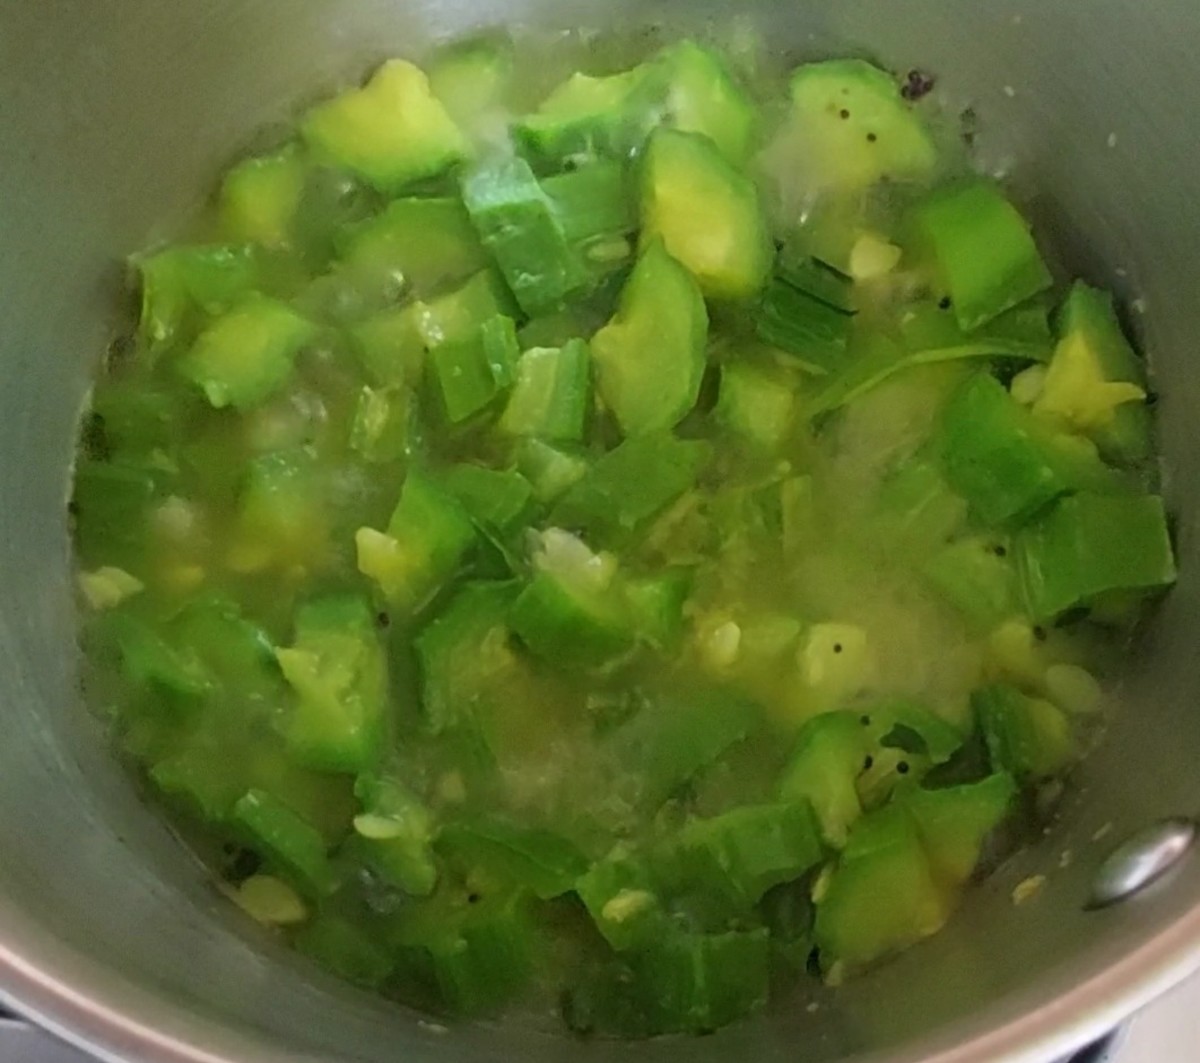 The ridge gourd is cooked well. 